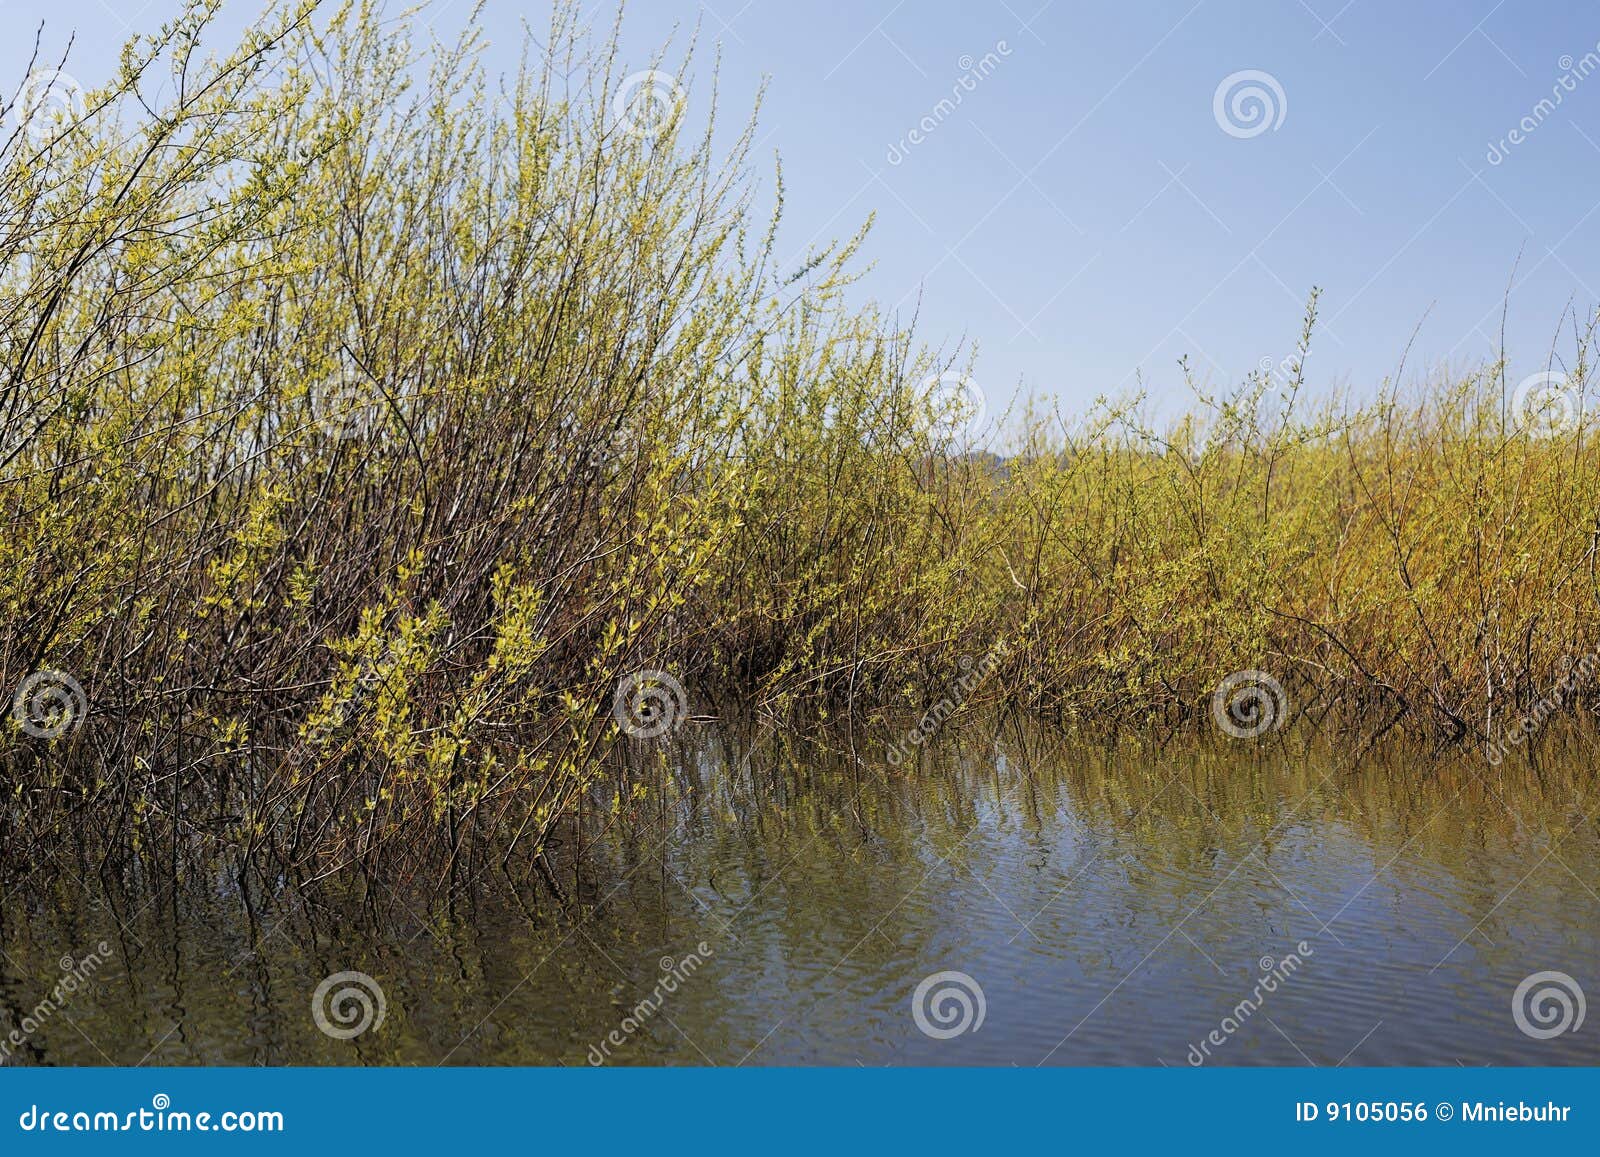 dense thicket at reclaimed wetlands edge